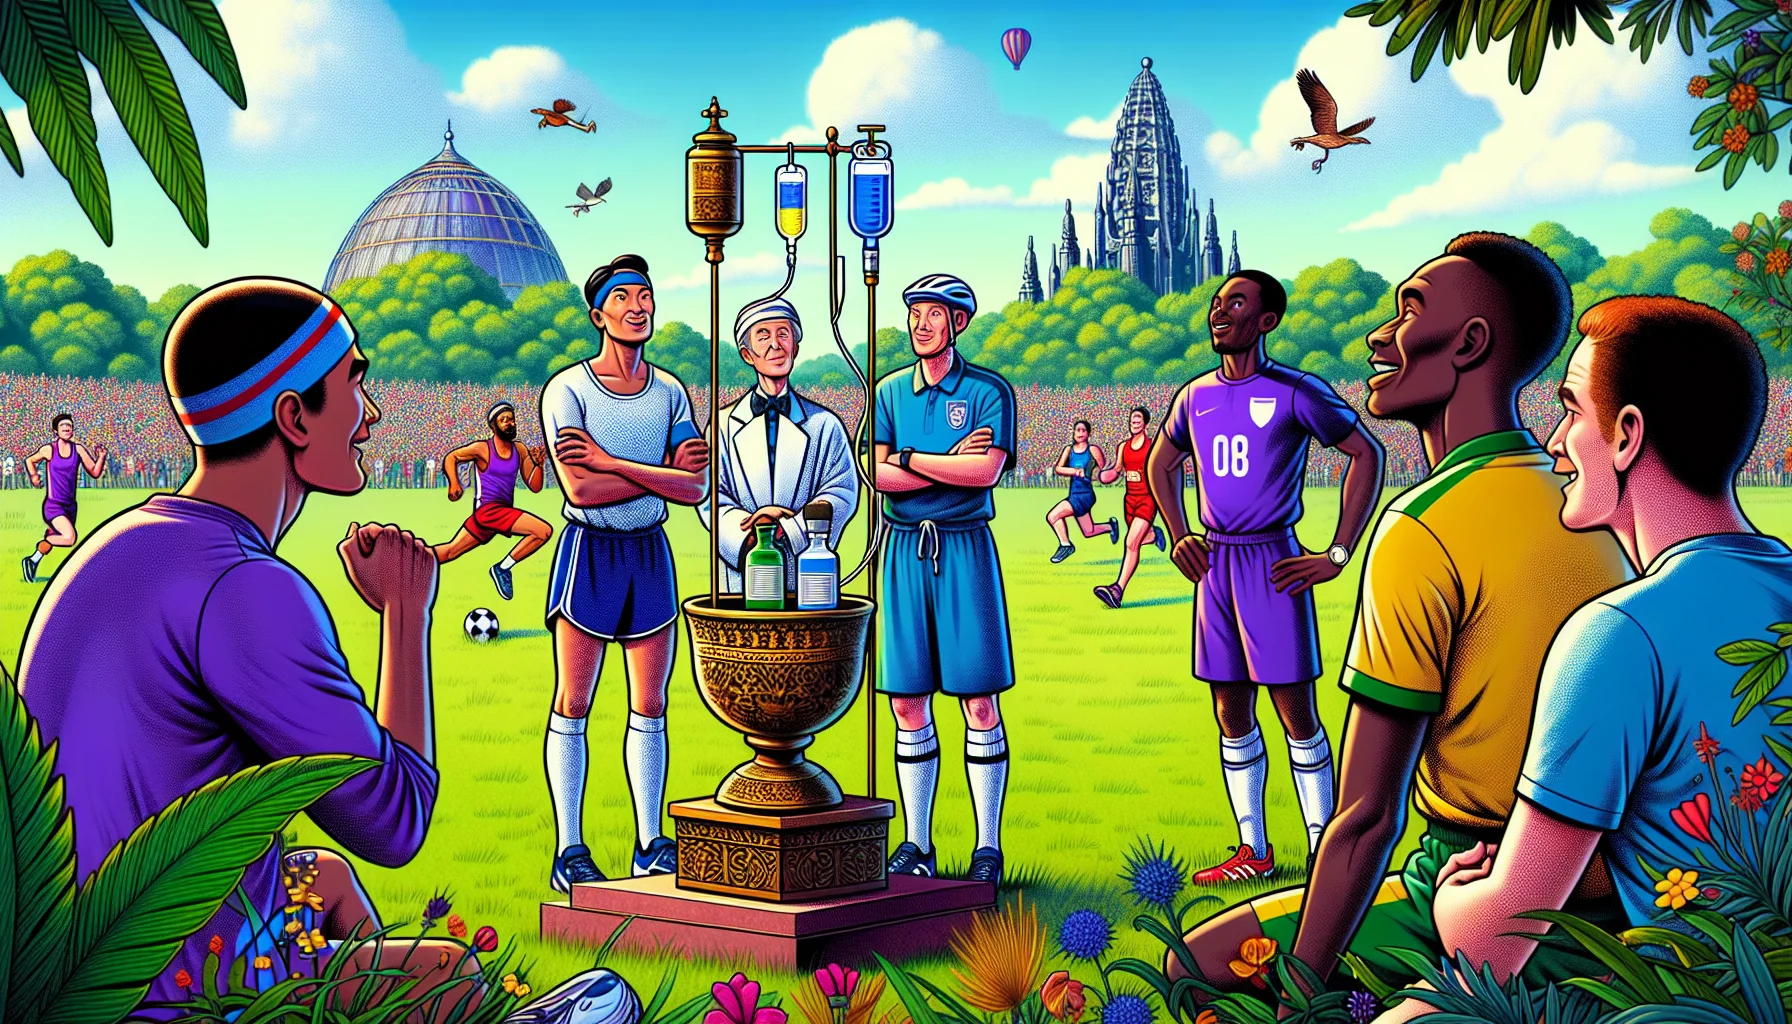 Create a detailed and humorous illustration of a scene taking place in a weekend park, where diverse individuals are engaged in various sports activities. In the foreground, a South Asian male distance runner, a Caucasian female footballer, and a Black male cyclist are all gathered around a ceremonial magnesium IV drip set on a pedestal. The characters are shown with playful expressions of awe and curiosity, as if the magnesium drip is a magical elixir. They are equipped with sports outfits, complete with helmets, shin guards and running shoes. Lively background and vivid colors are preferred to create an enticing atmosphere.